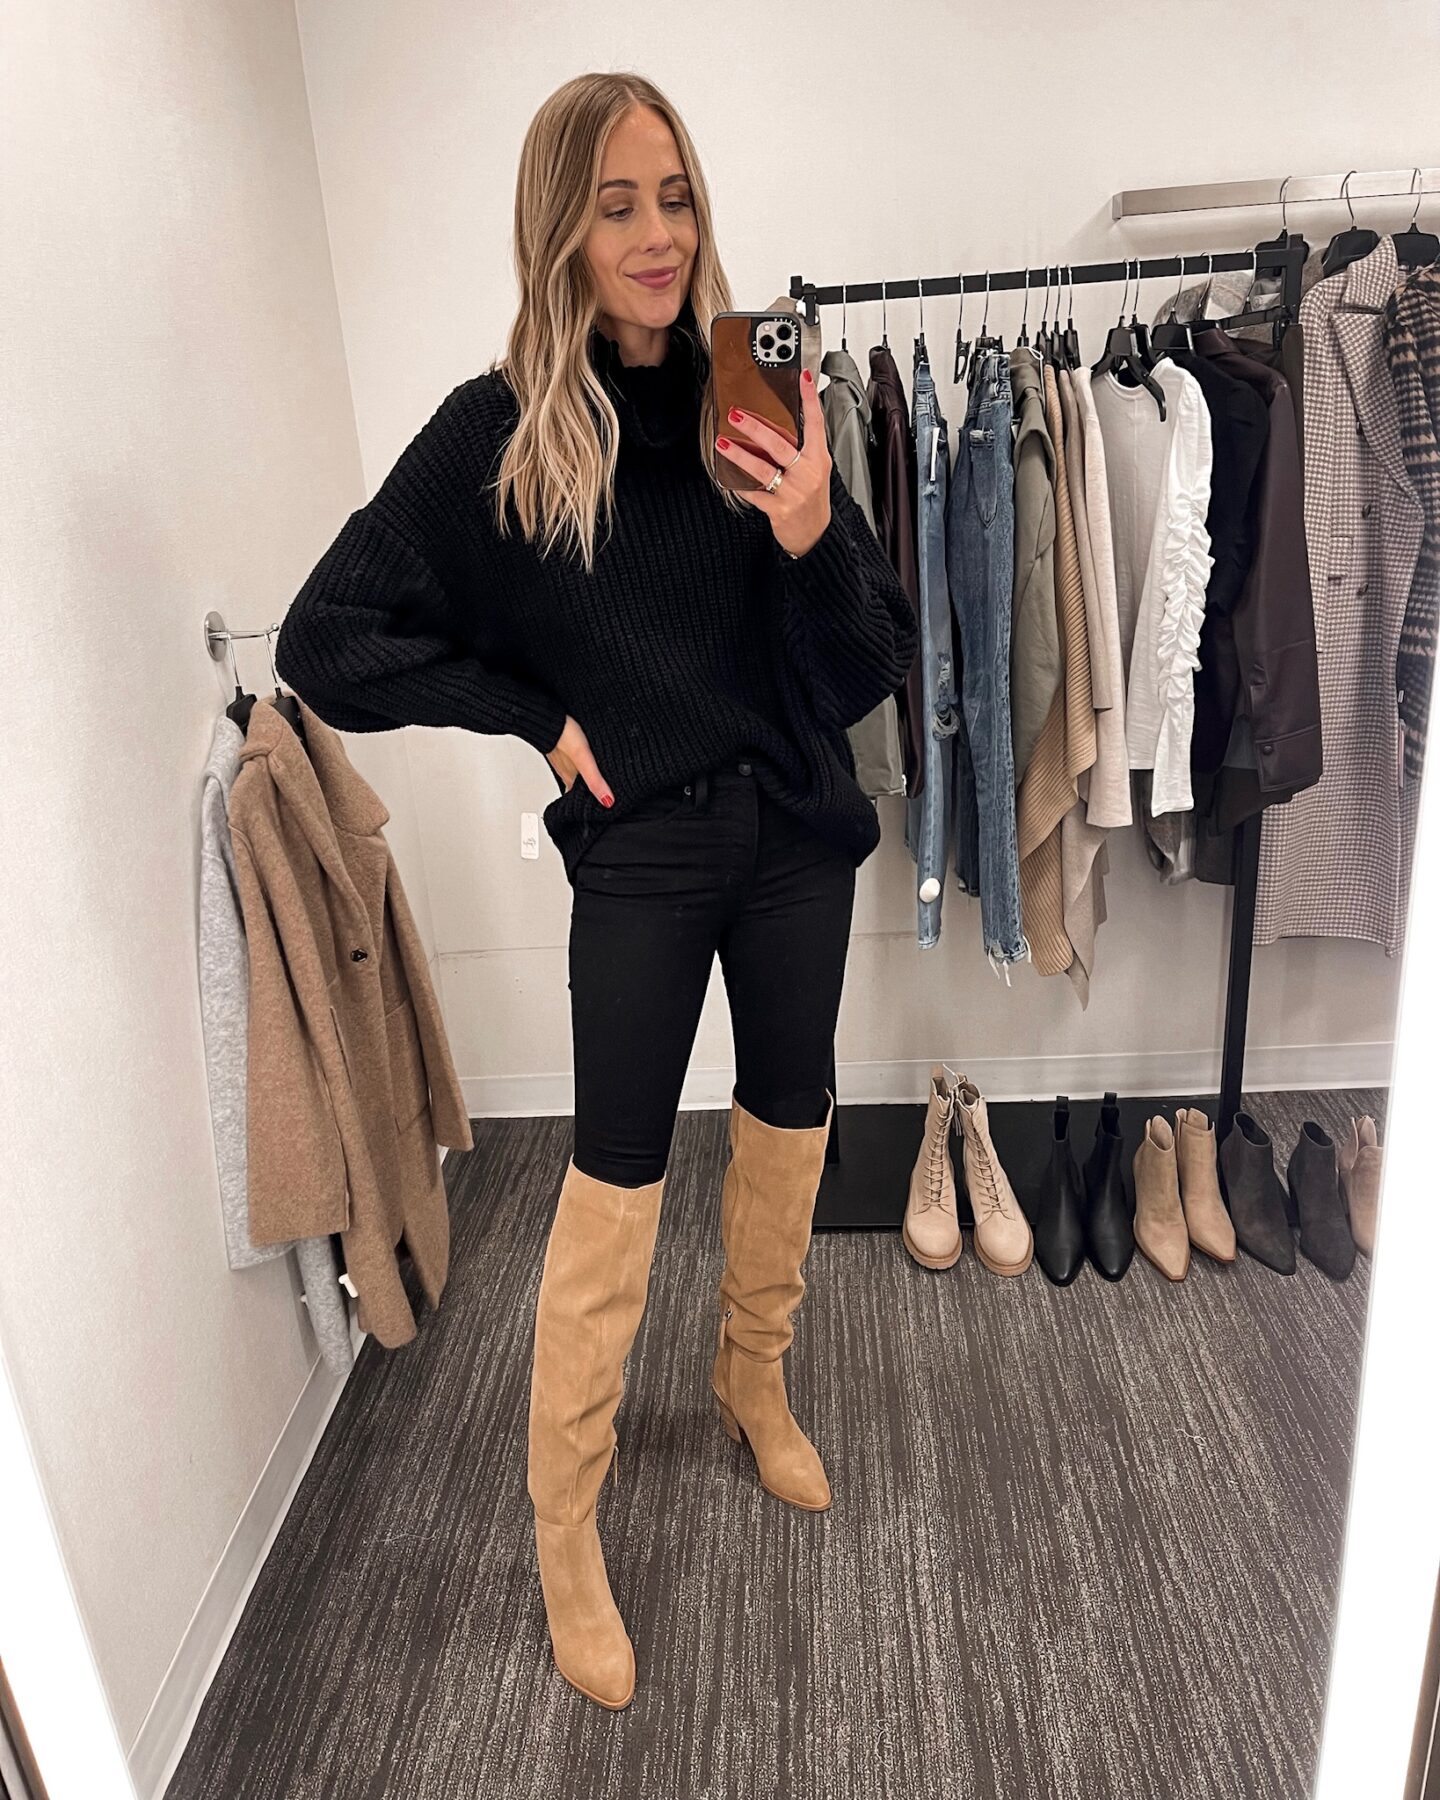 Fashion Jackson Nordstrom Anniversary Sale 2021 Black Free People Sweater Black Jeans Tan Knee High Boots